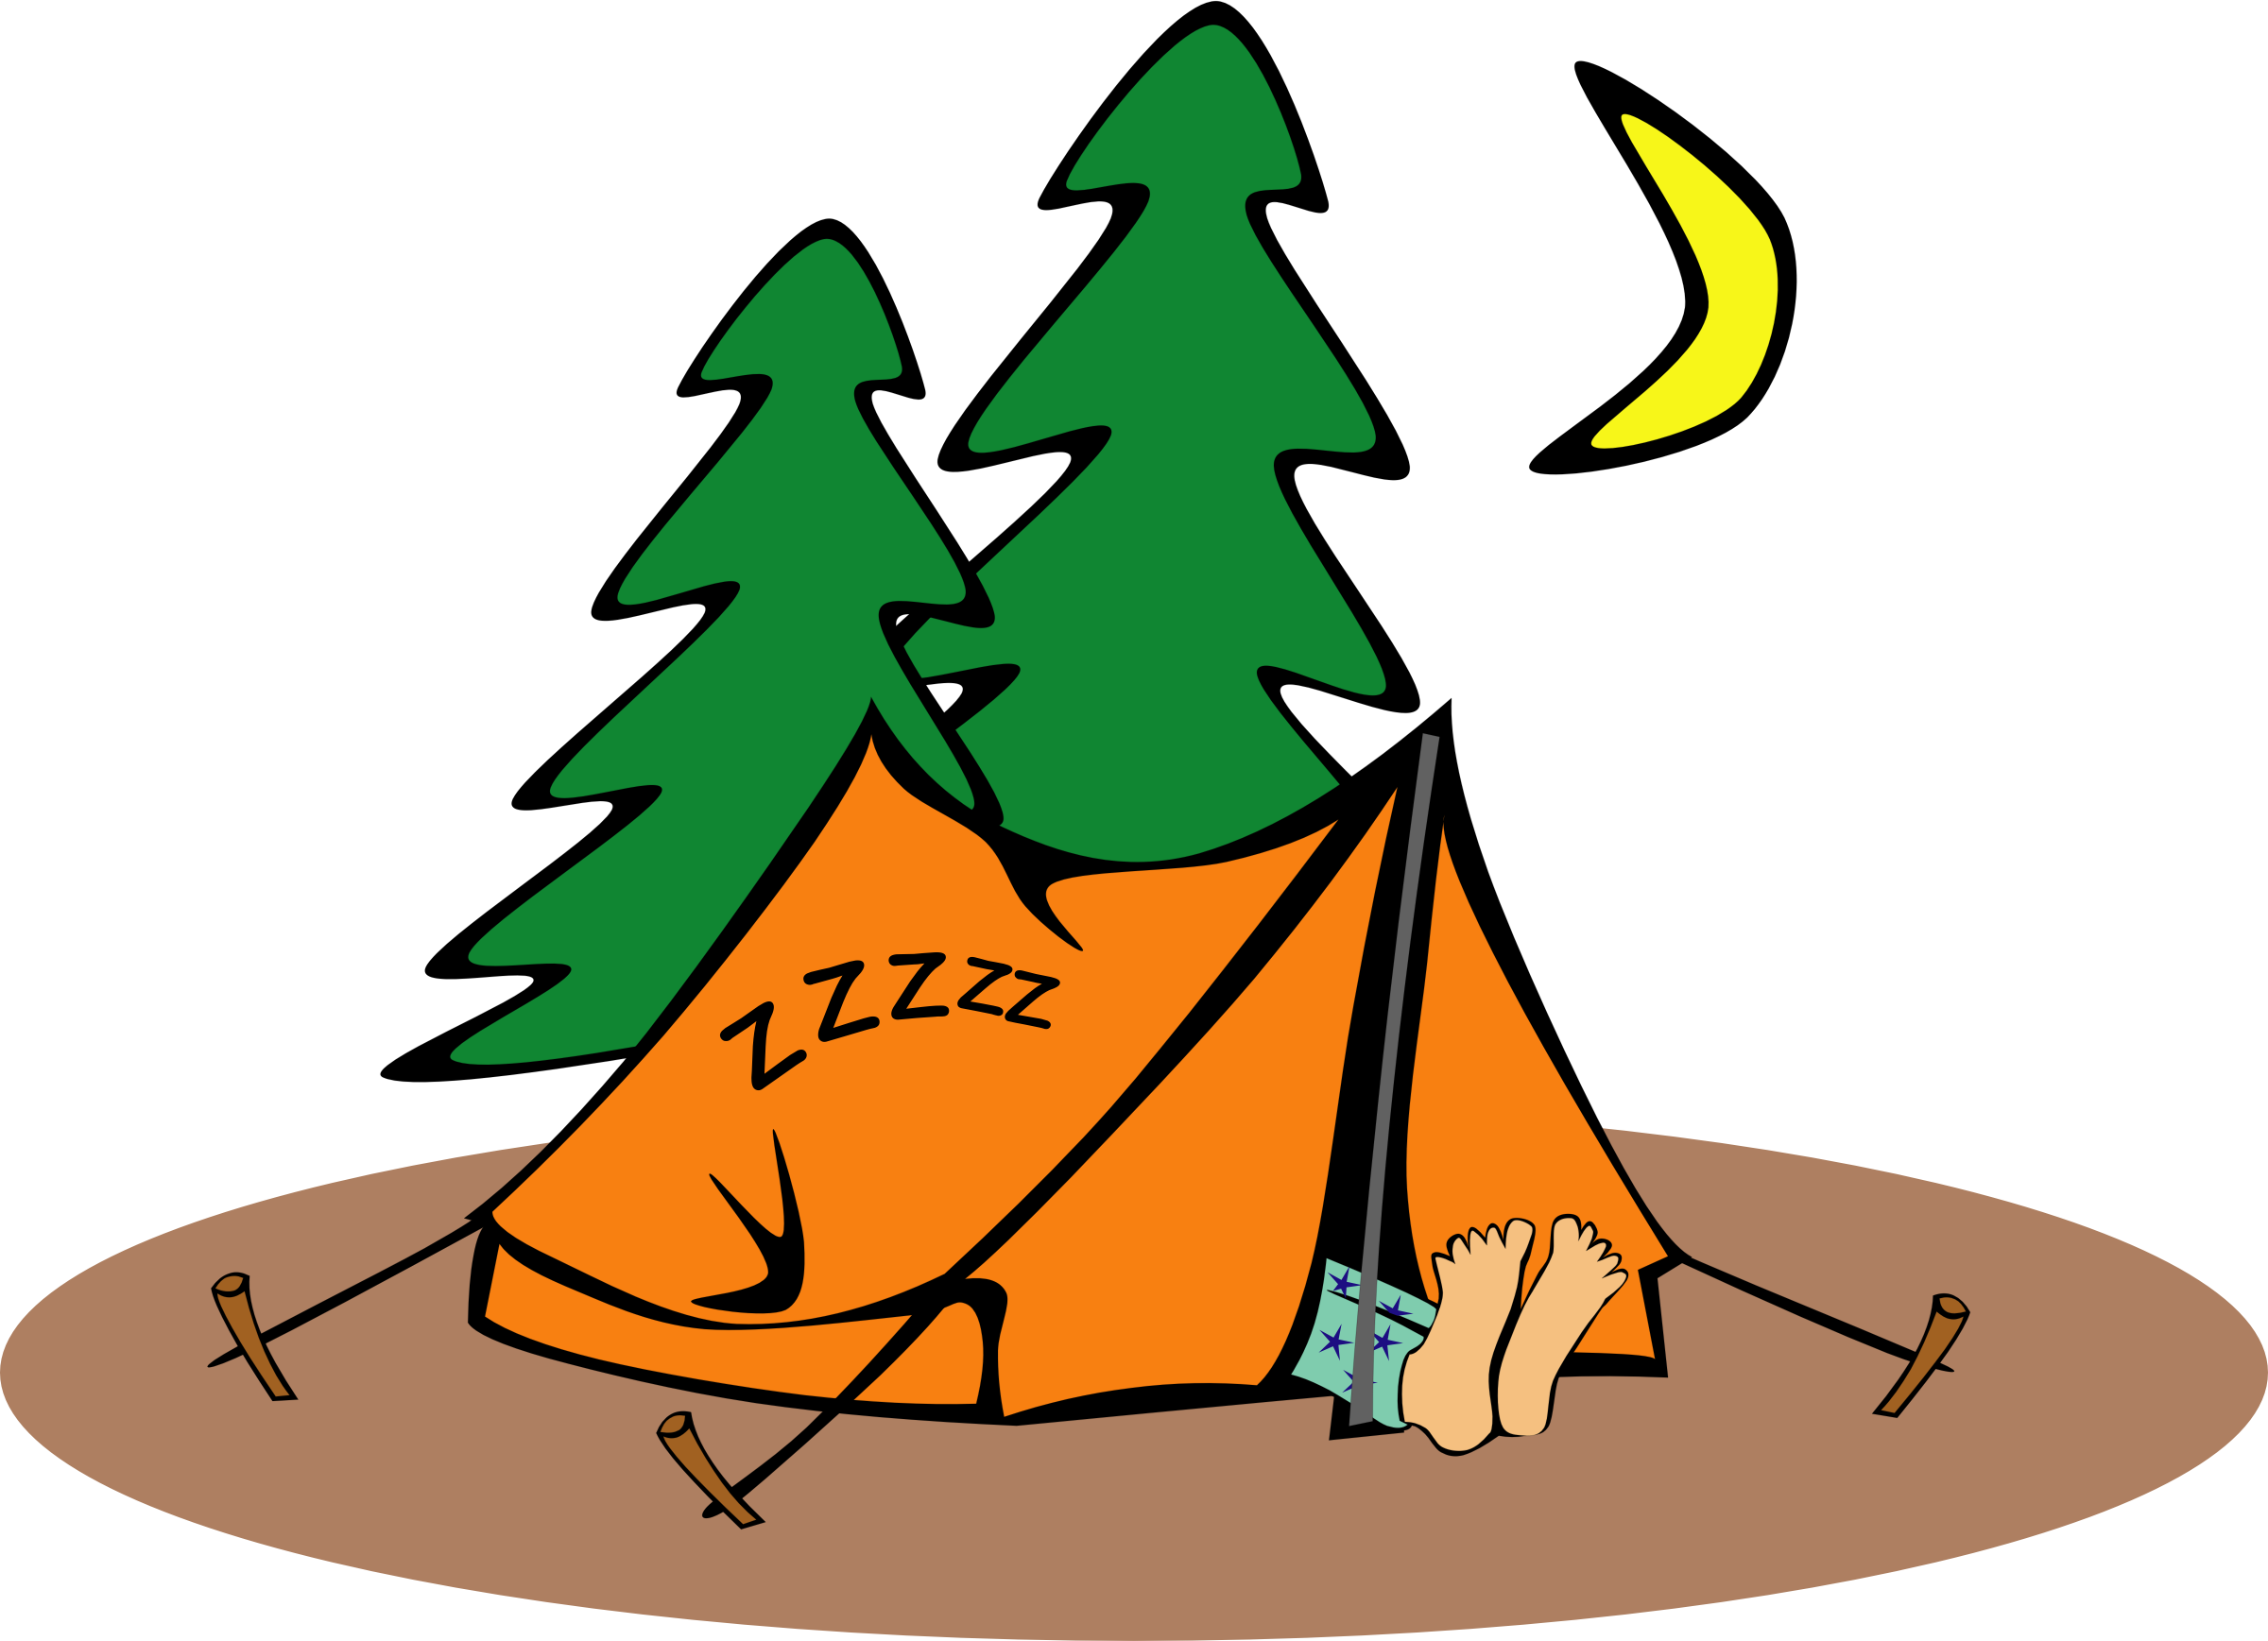 Download and share clipart about In A Tent - Camping Clipart, Find more hig...